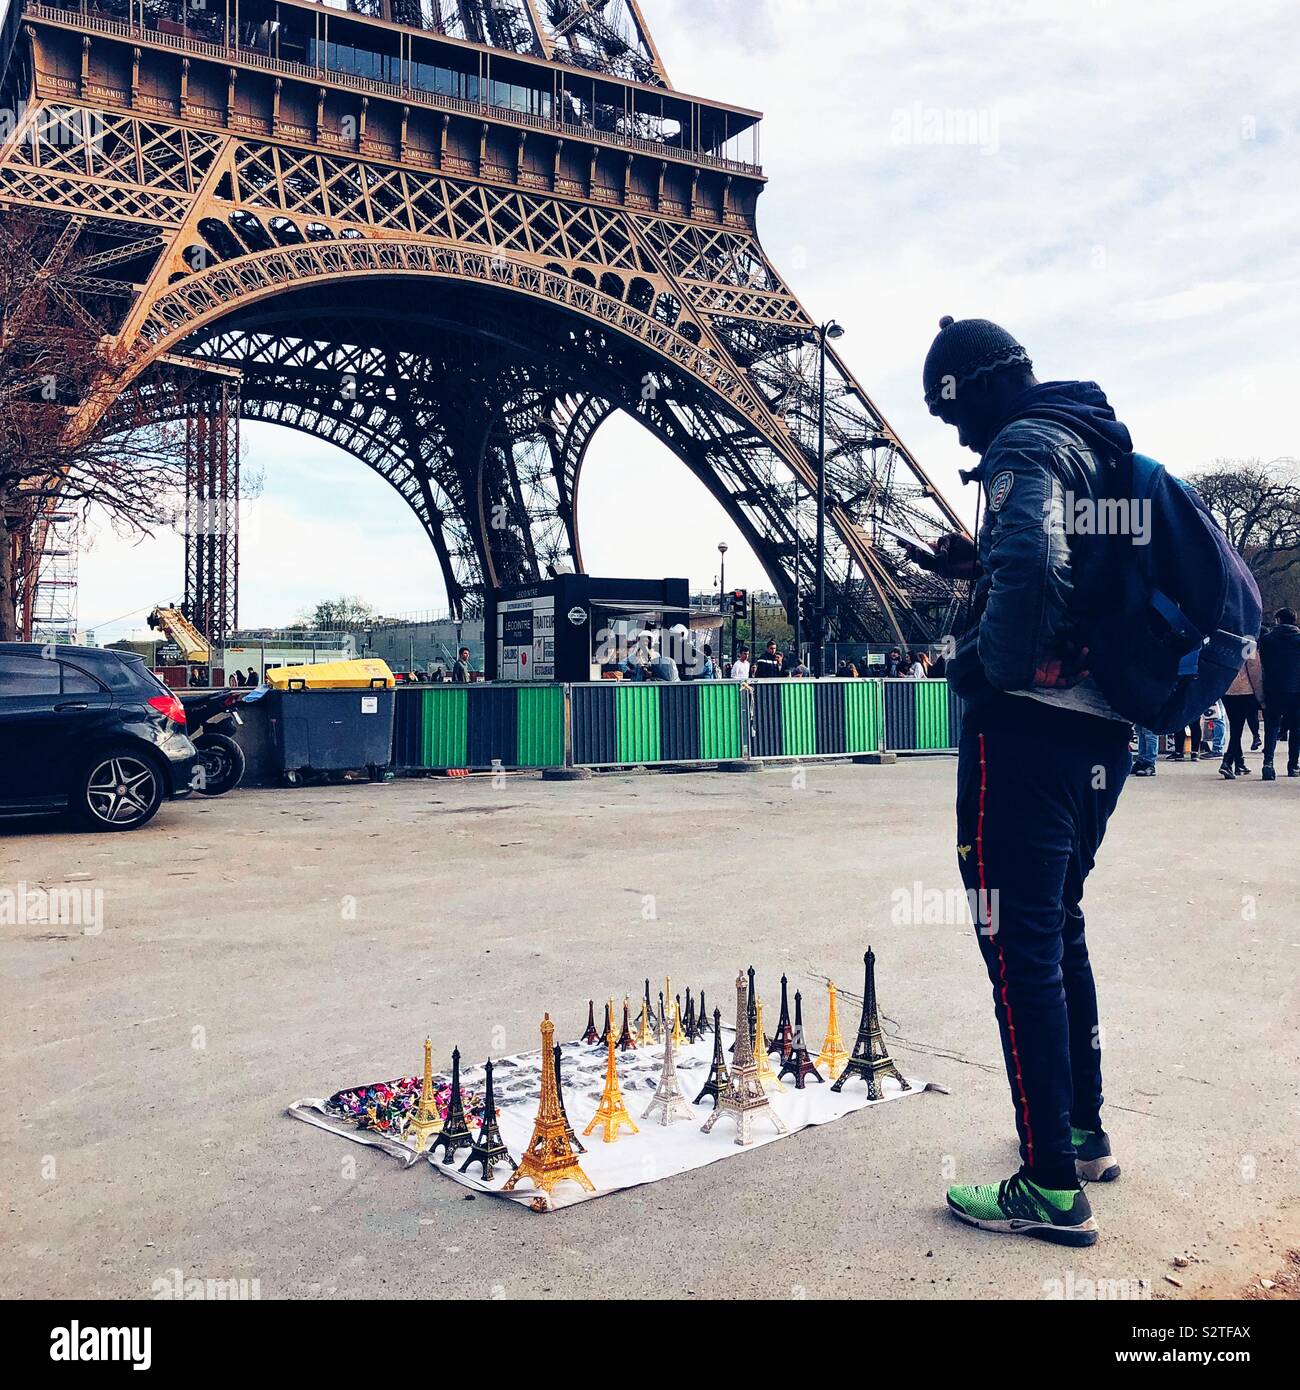 Souvenirs seller checking his phone at the foot of Eiffel Tower in Paris Stock Photo